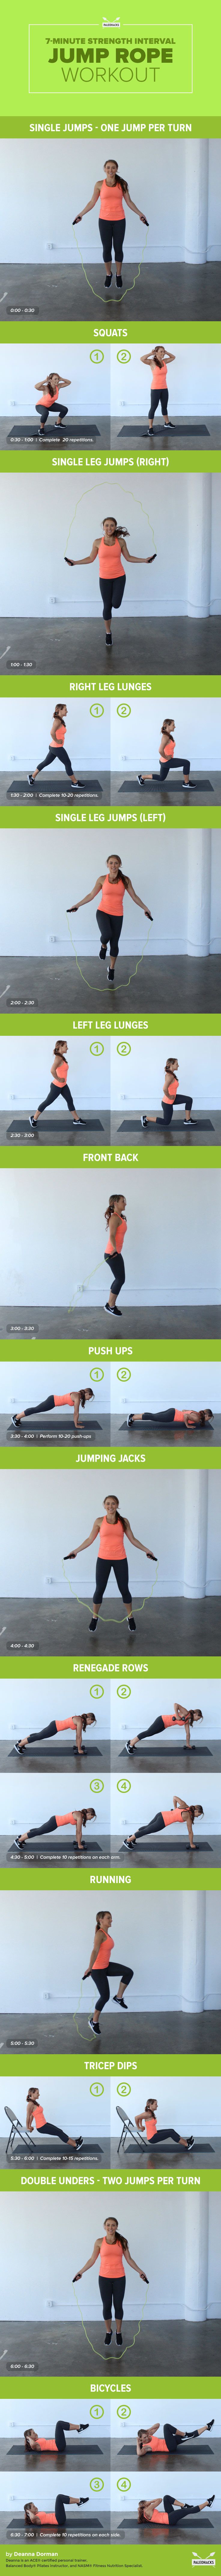 7-Minute-Strength-Interval-Jump-Rope-Workout-info